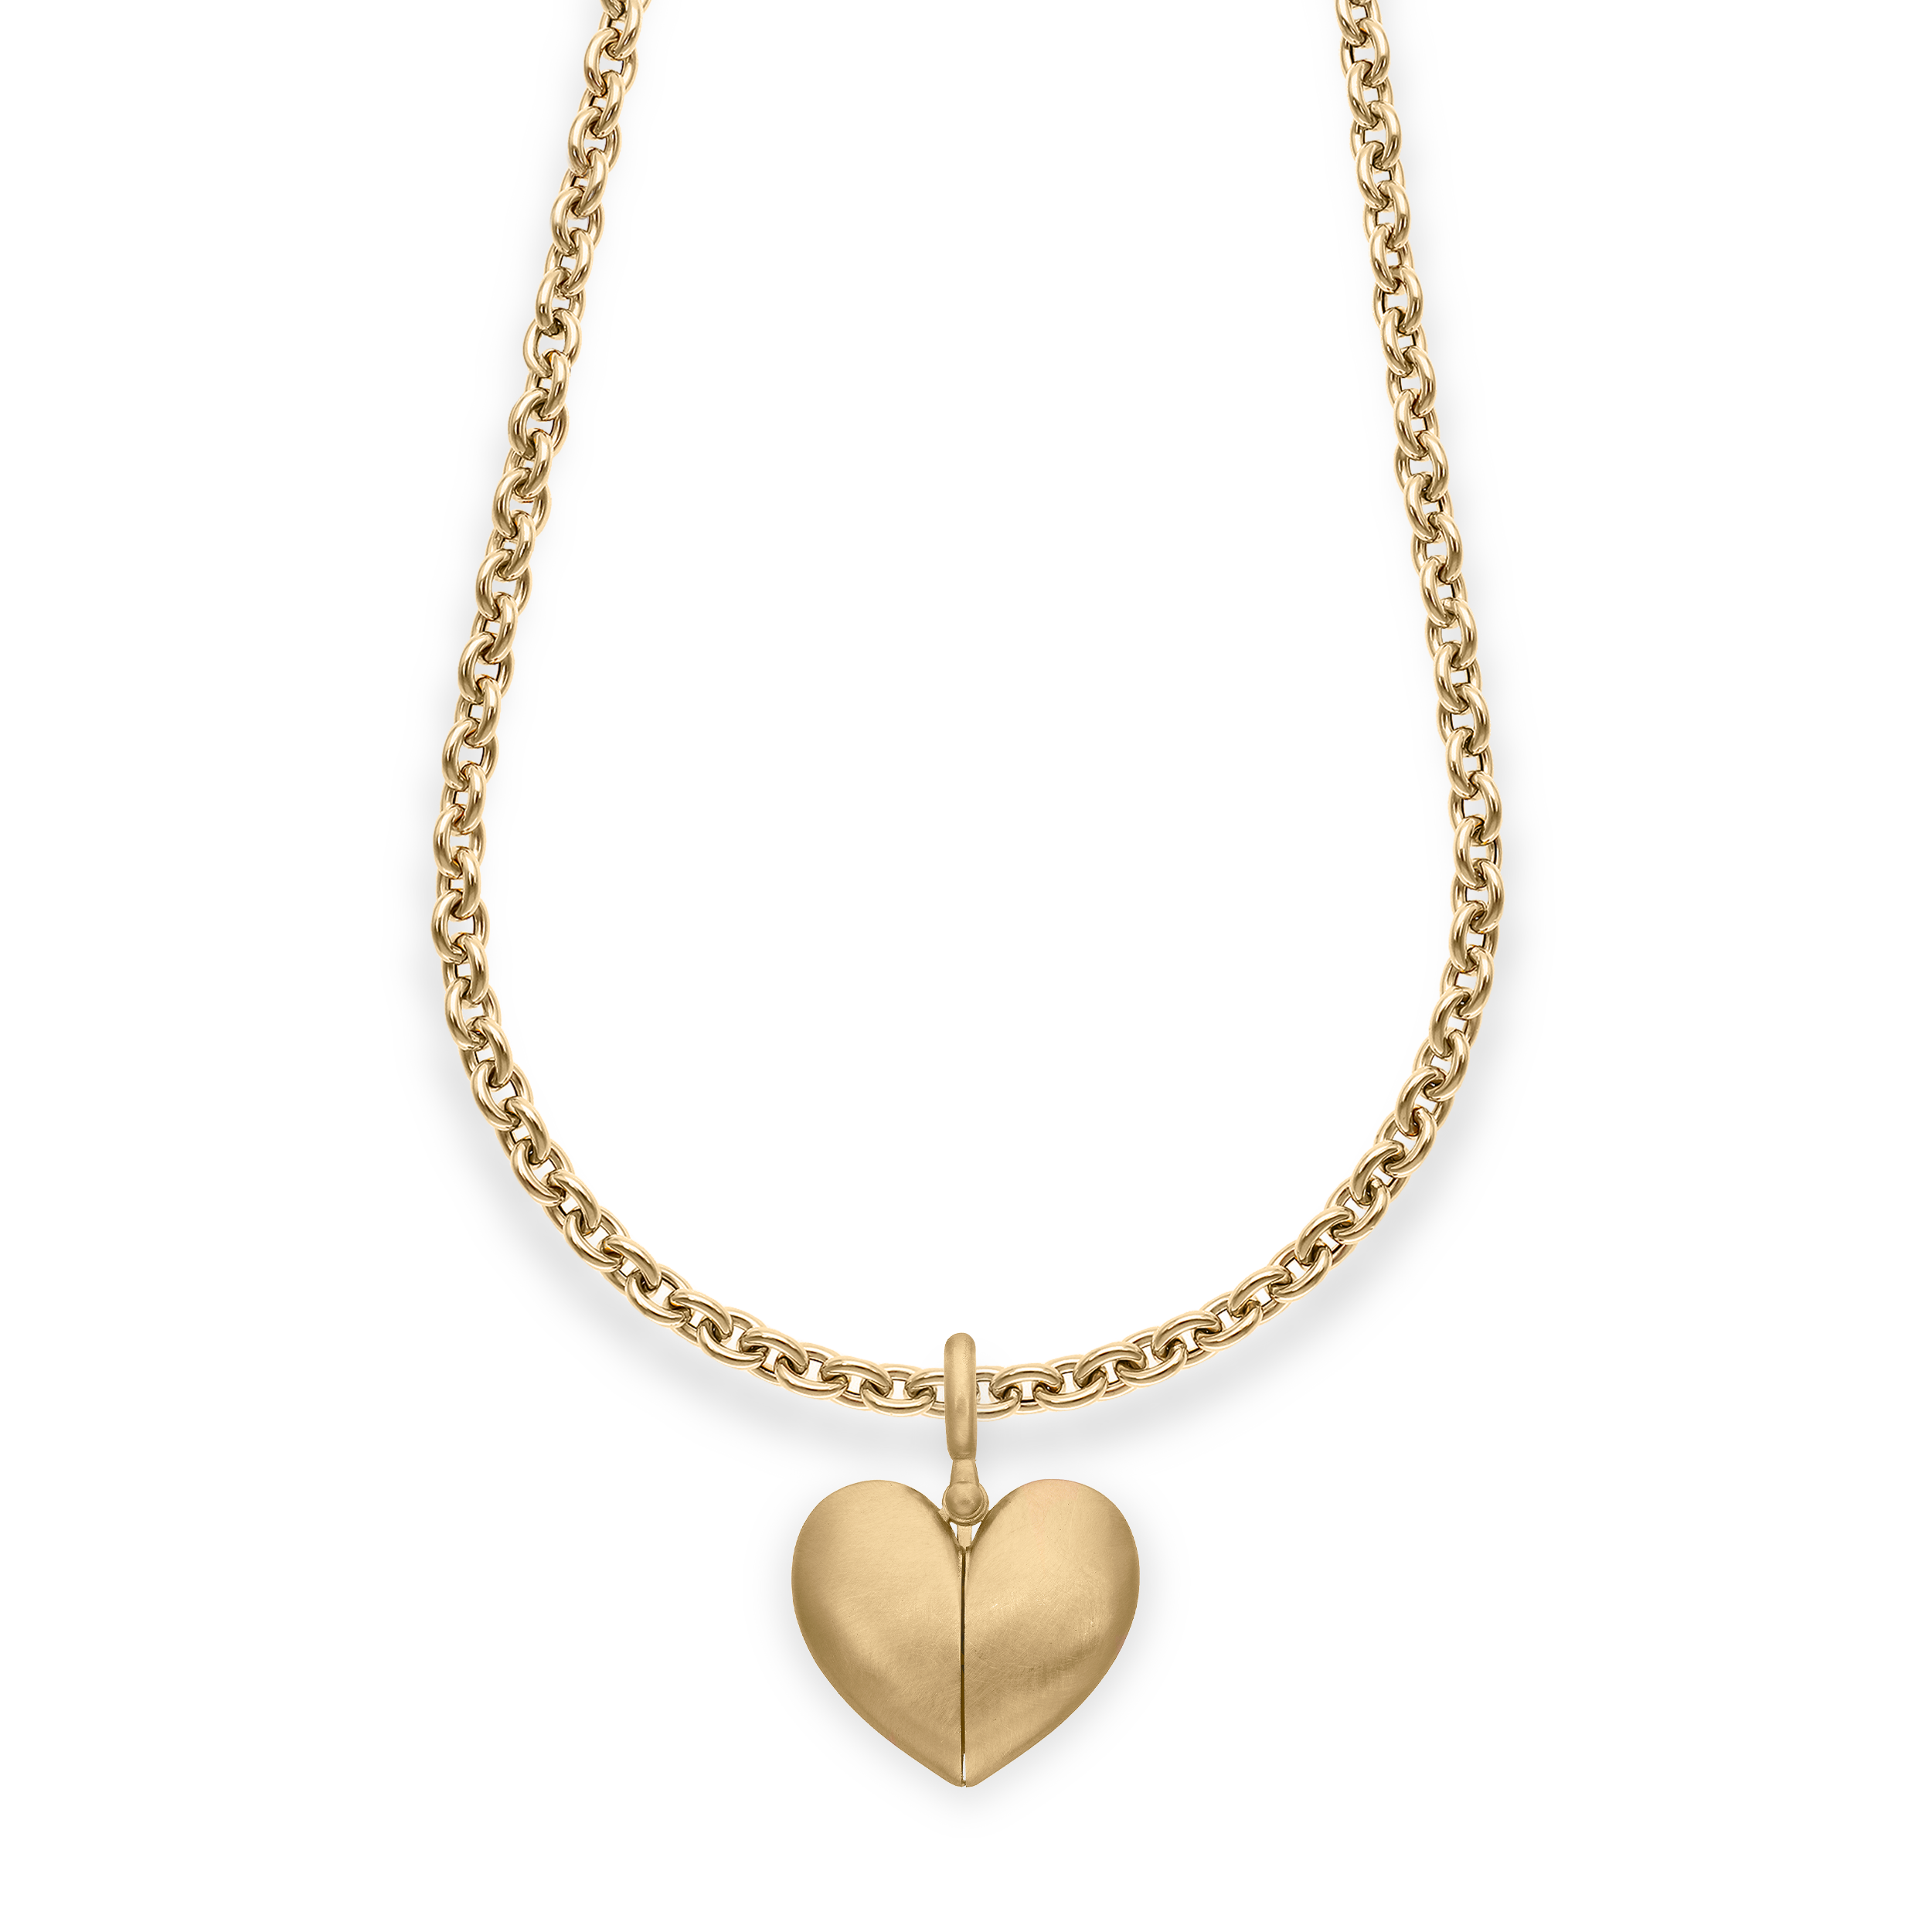 Paulette Brushed Yellow Gold "Open Heart" Pendant on Long Chain